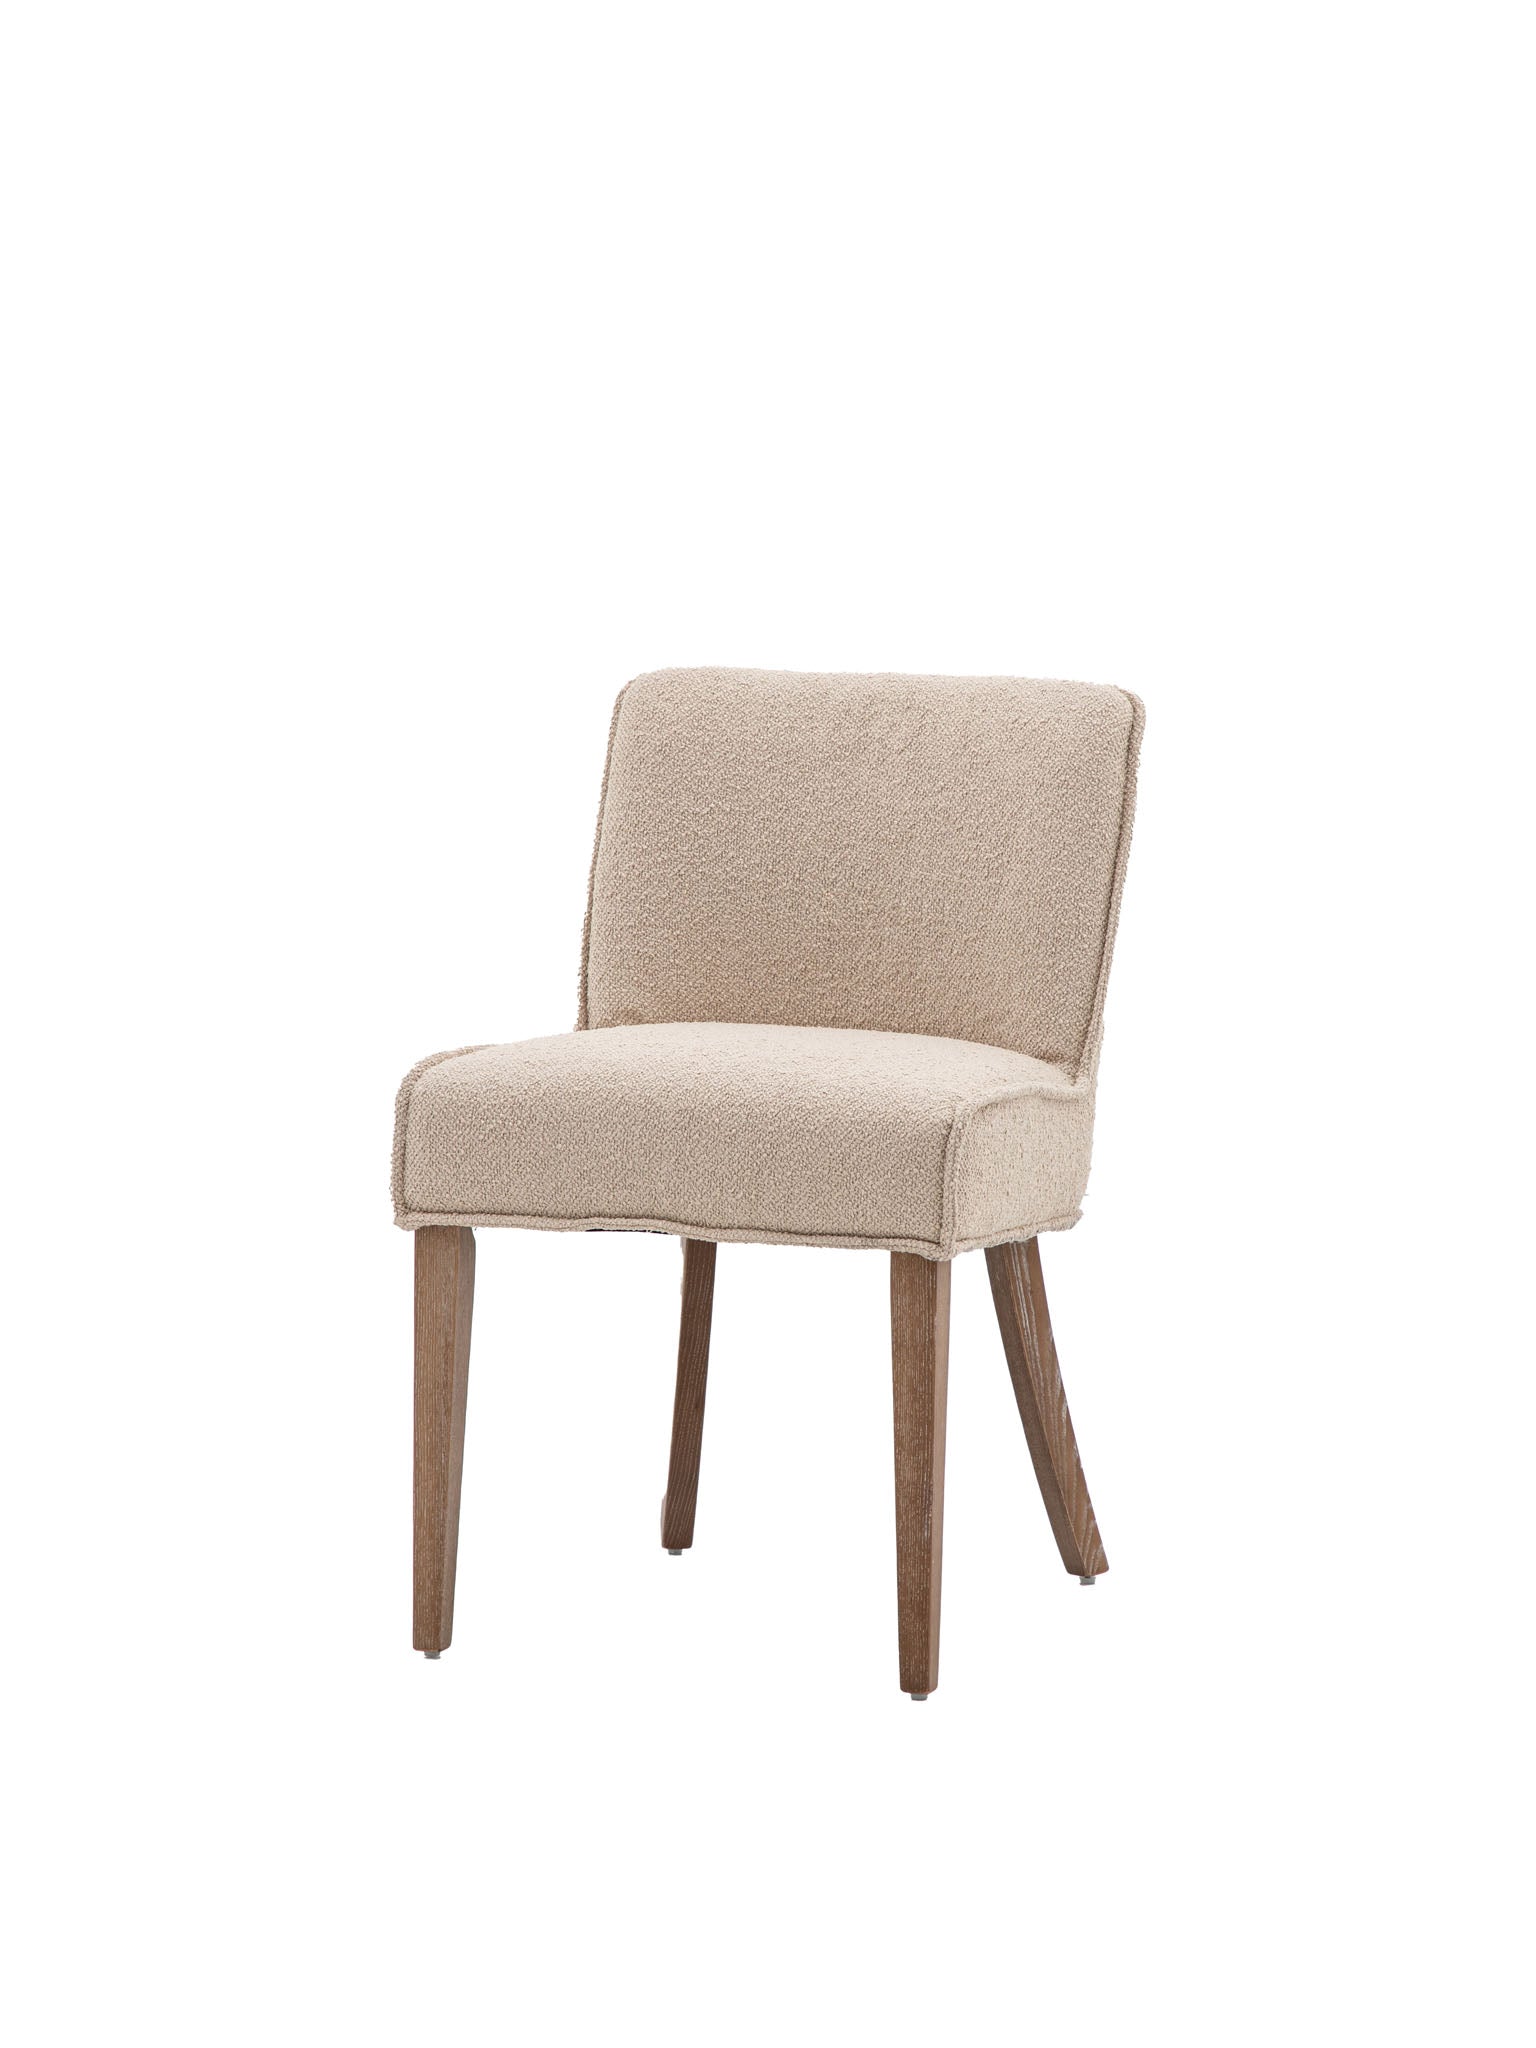 Dining Chair with oak legs and natural linen upholstry